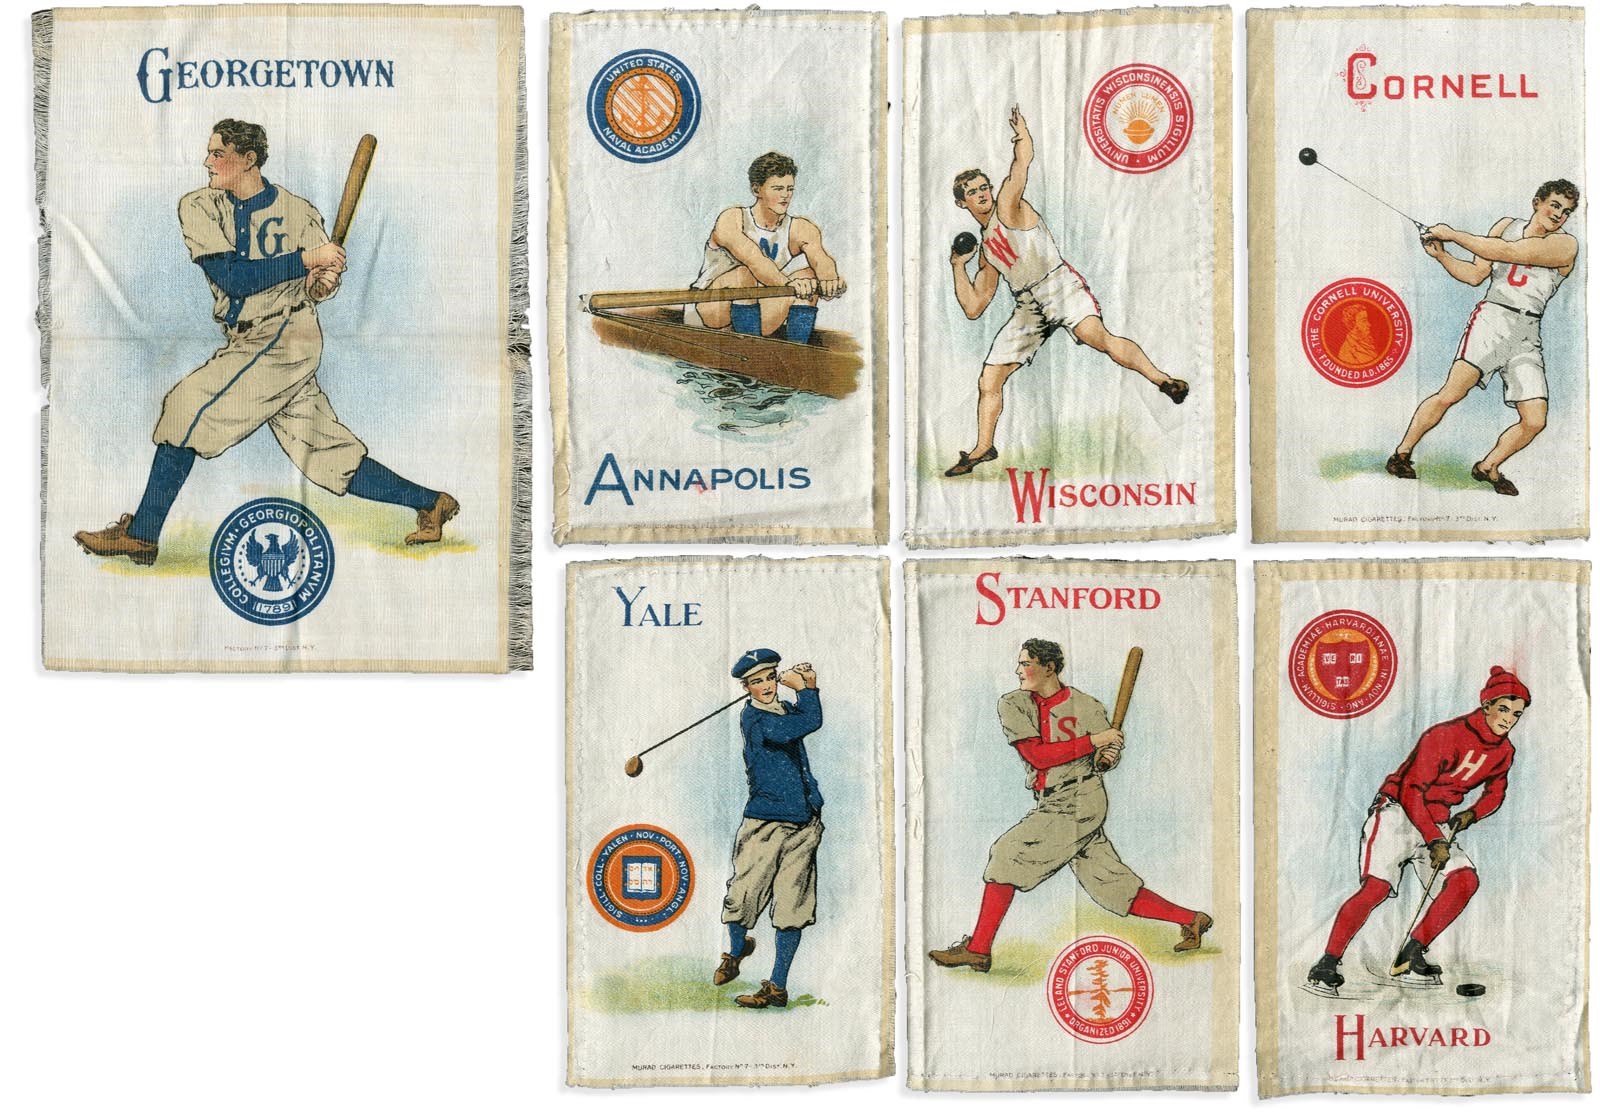 Baseball and Trading Cards - 1910 Old Murad S21 & S22 Silks (11)